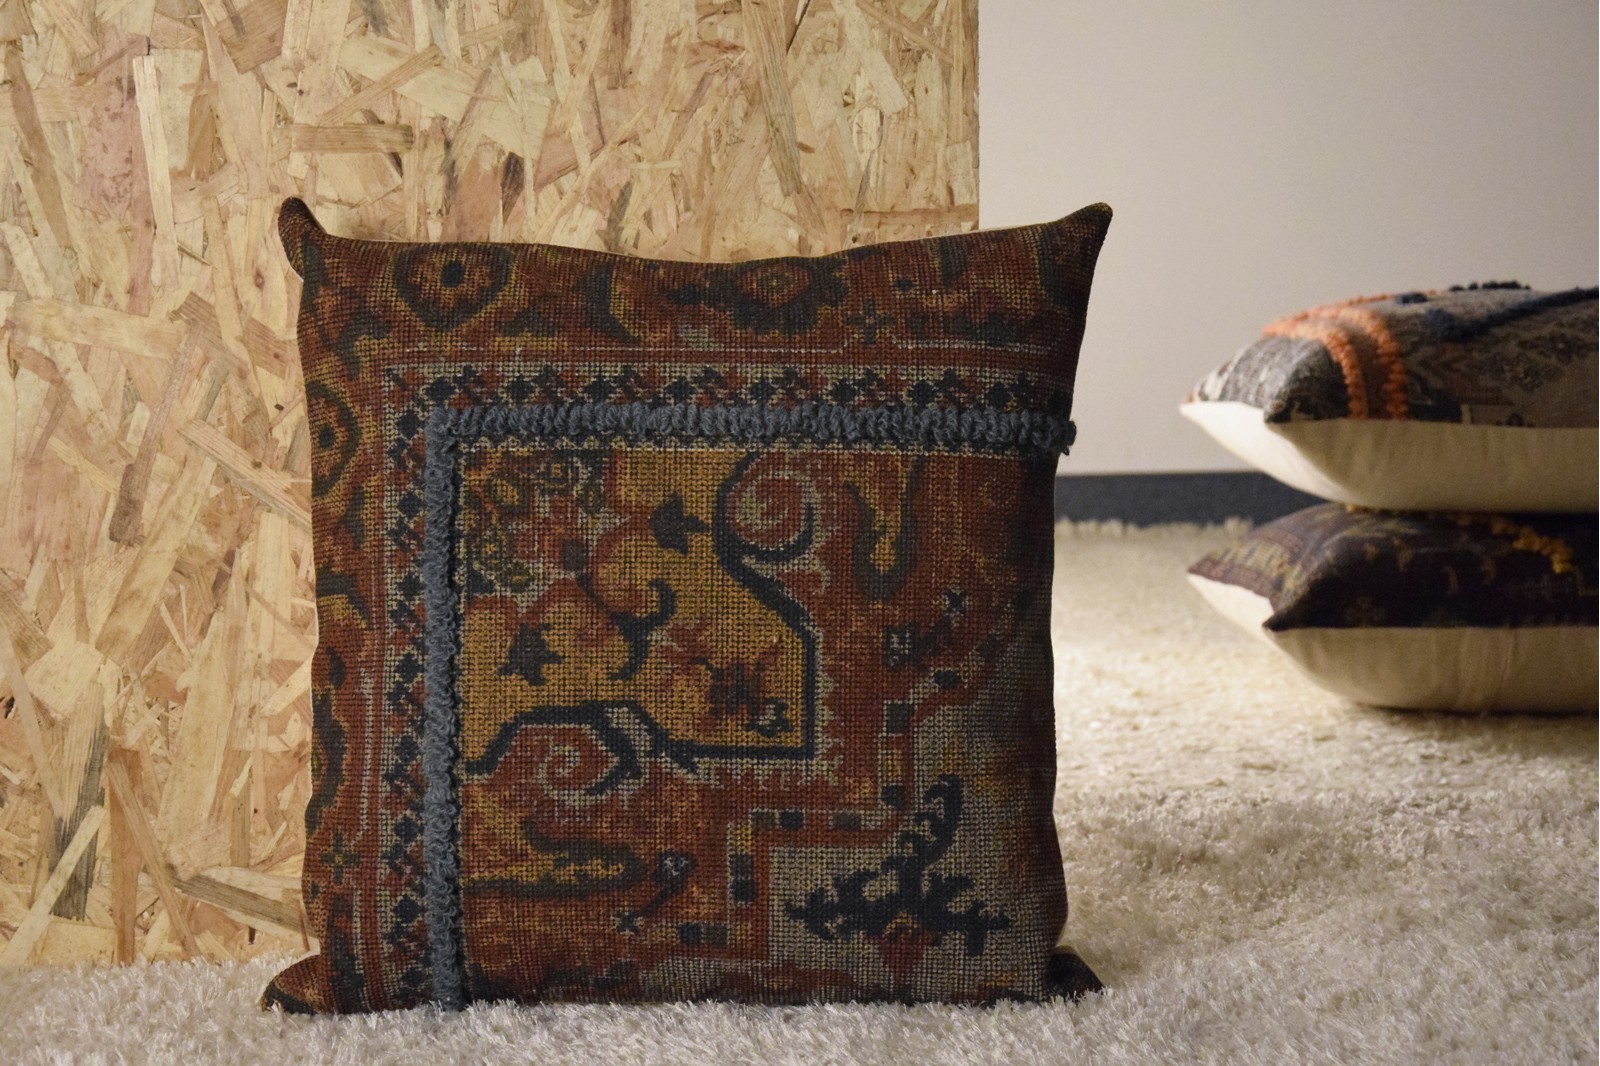 COTTON-WOOL CUSHION. OCHRE COLORS-BLUE EMBROIDERY